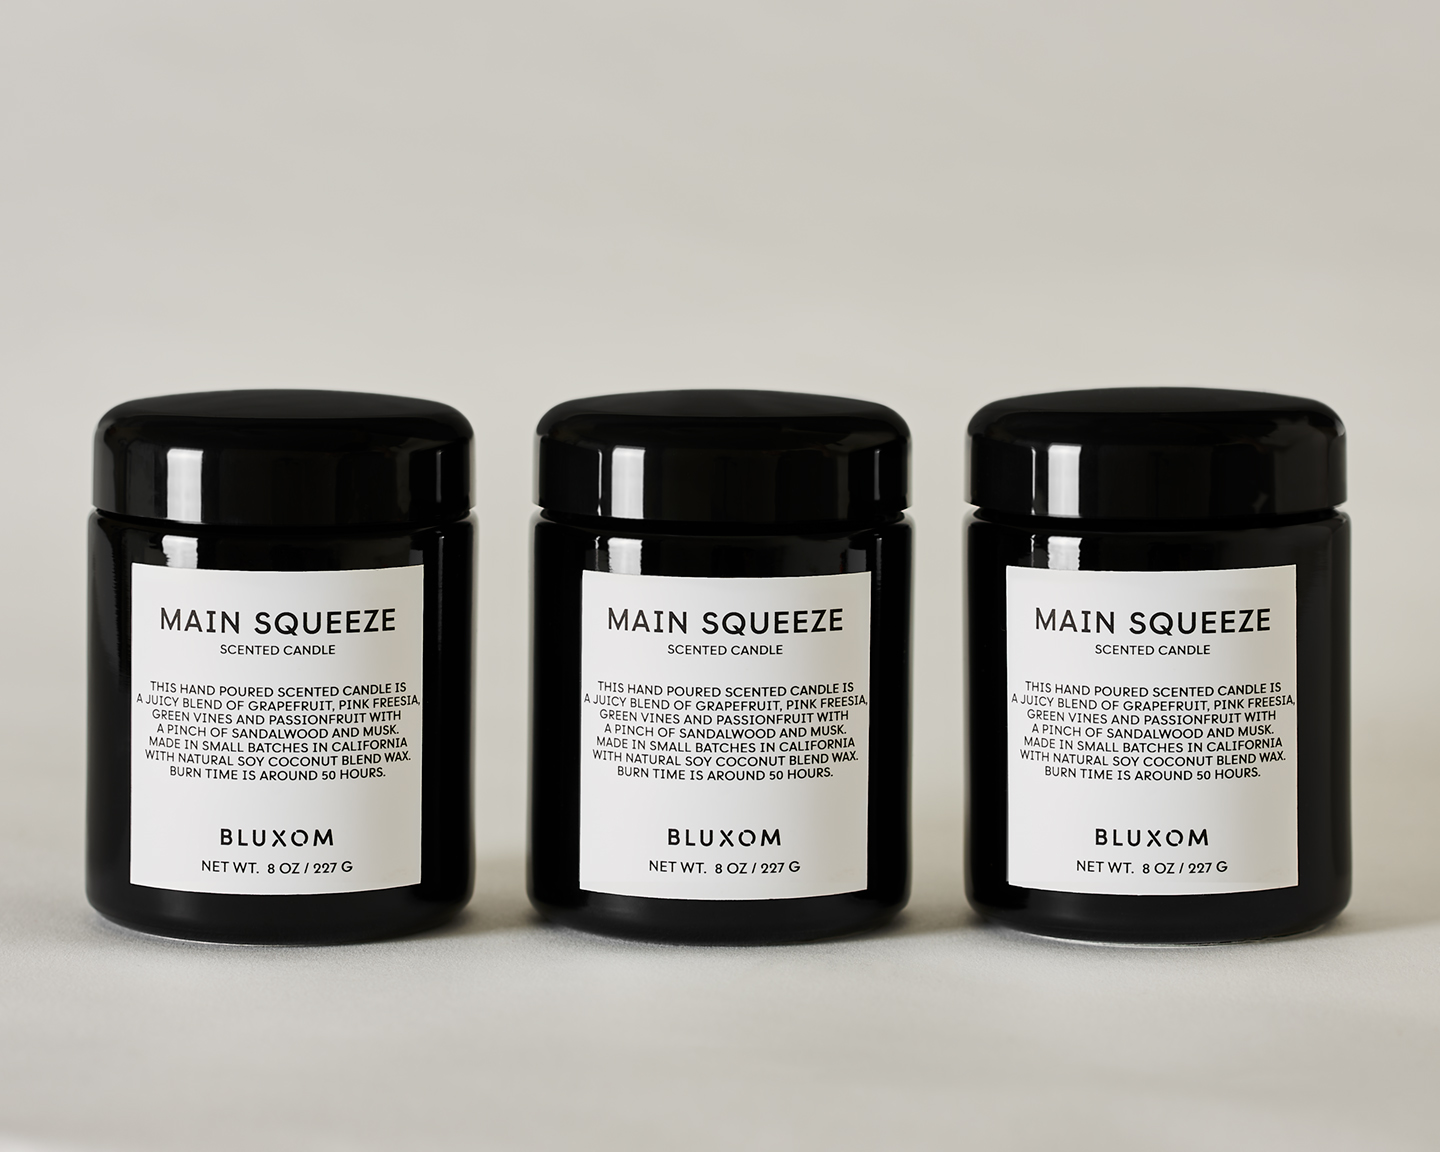 BLUXOM MAIN SQUEEZE COCONUT SOY SCENTED CANDLE TRIO 3 x 8oz / 227g alt